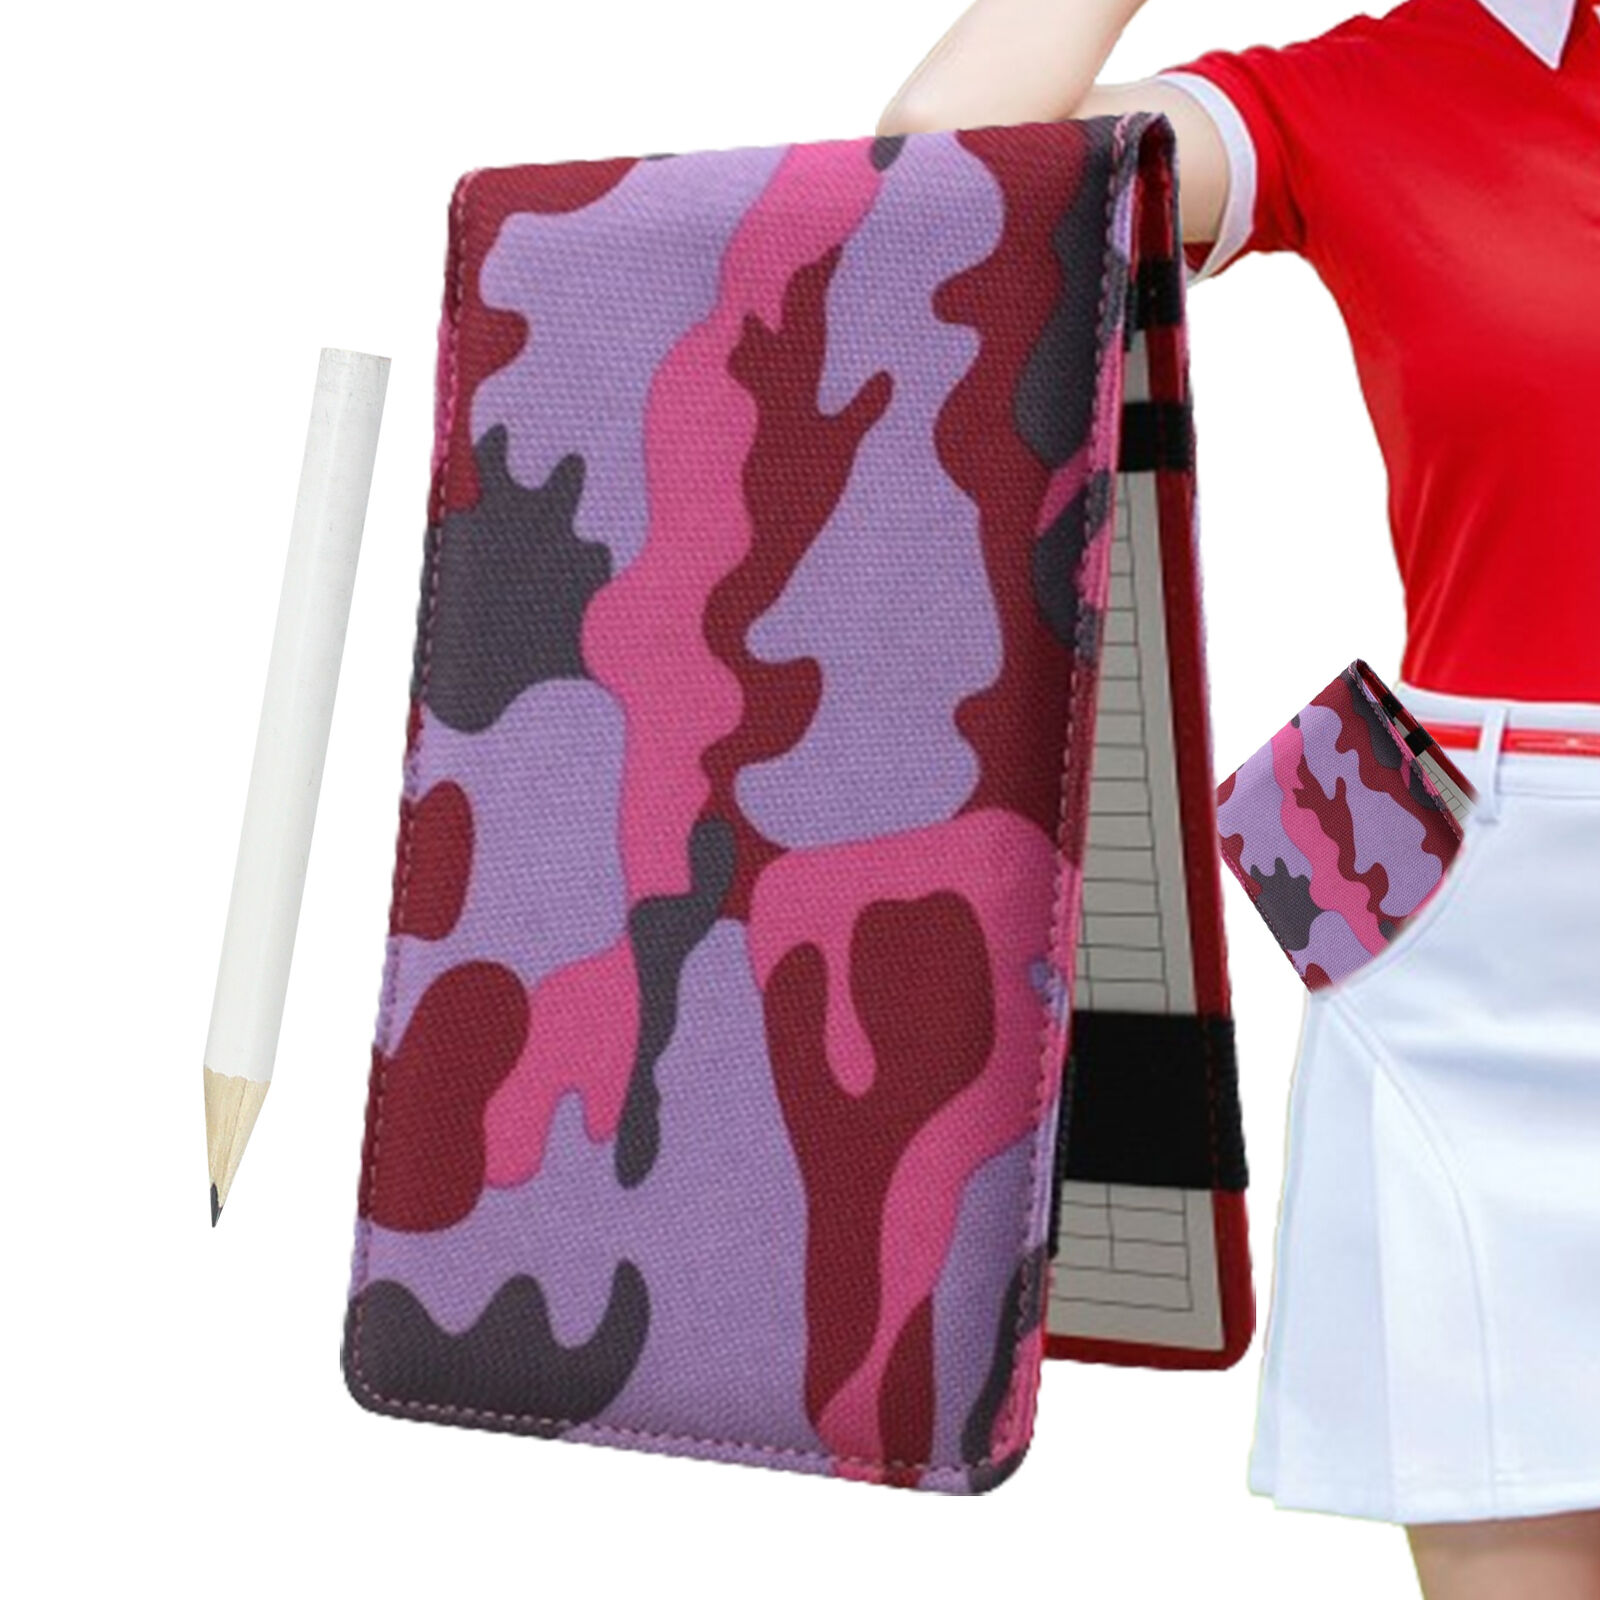 Golf Score Book Golf Journal Notebook with Pencil Oxford Cloth Club capable Unbranded does not apply - фотография #4